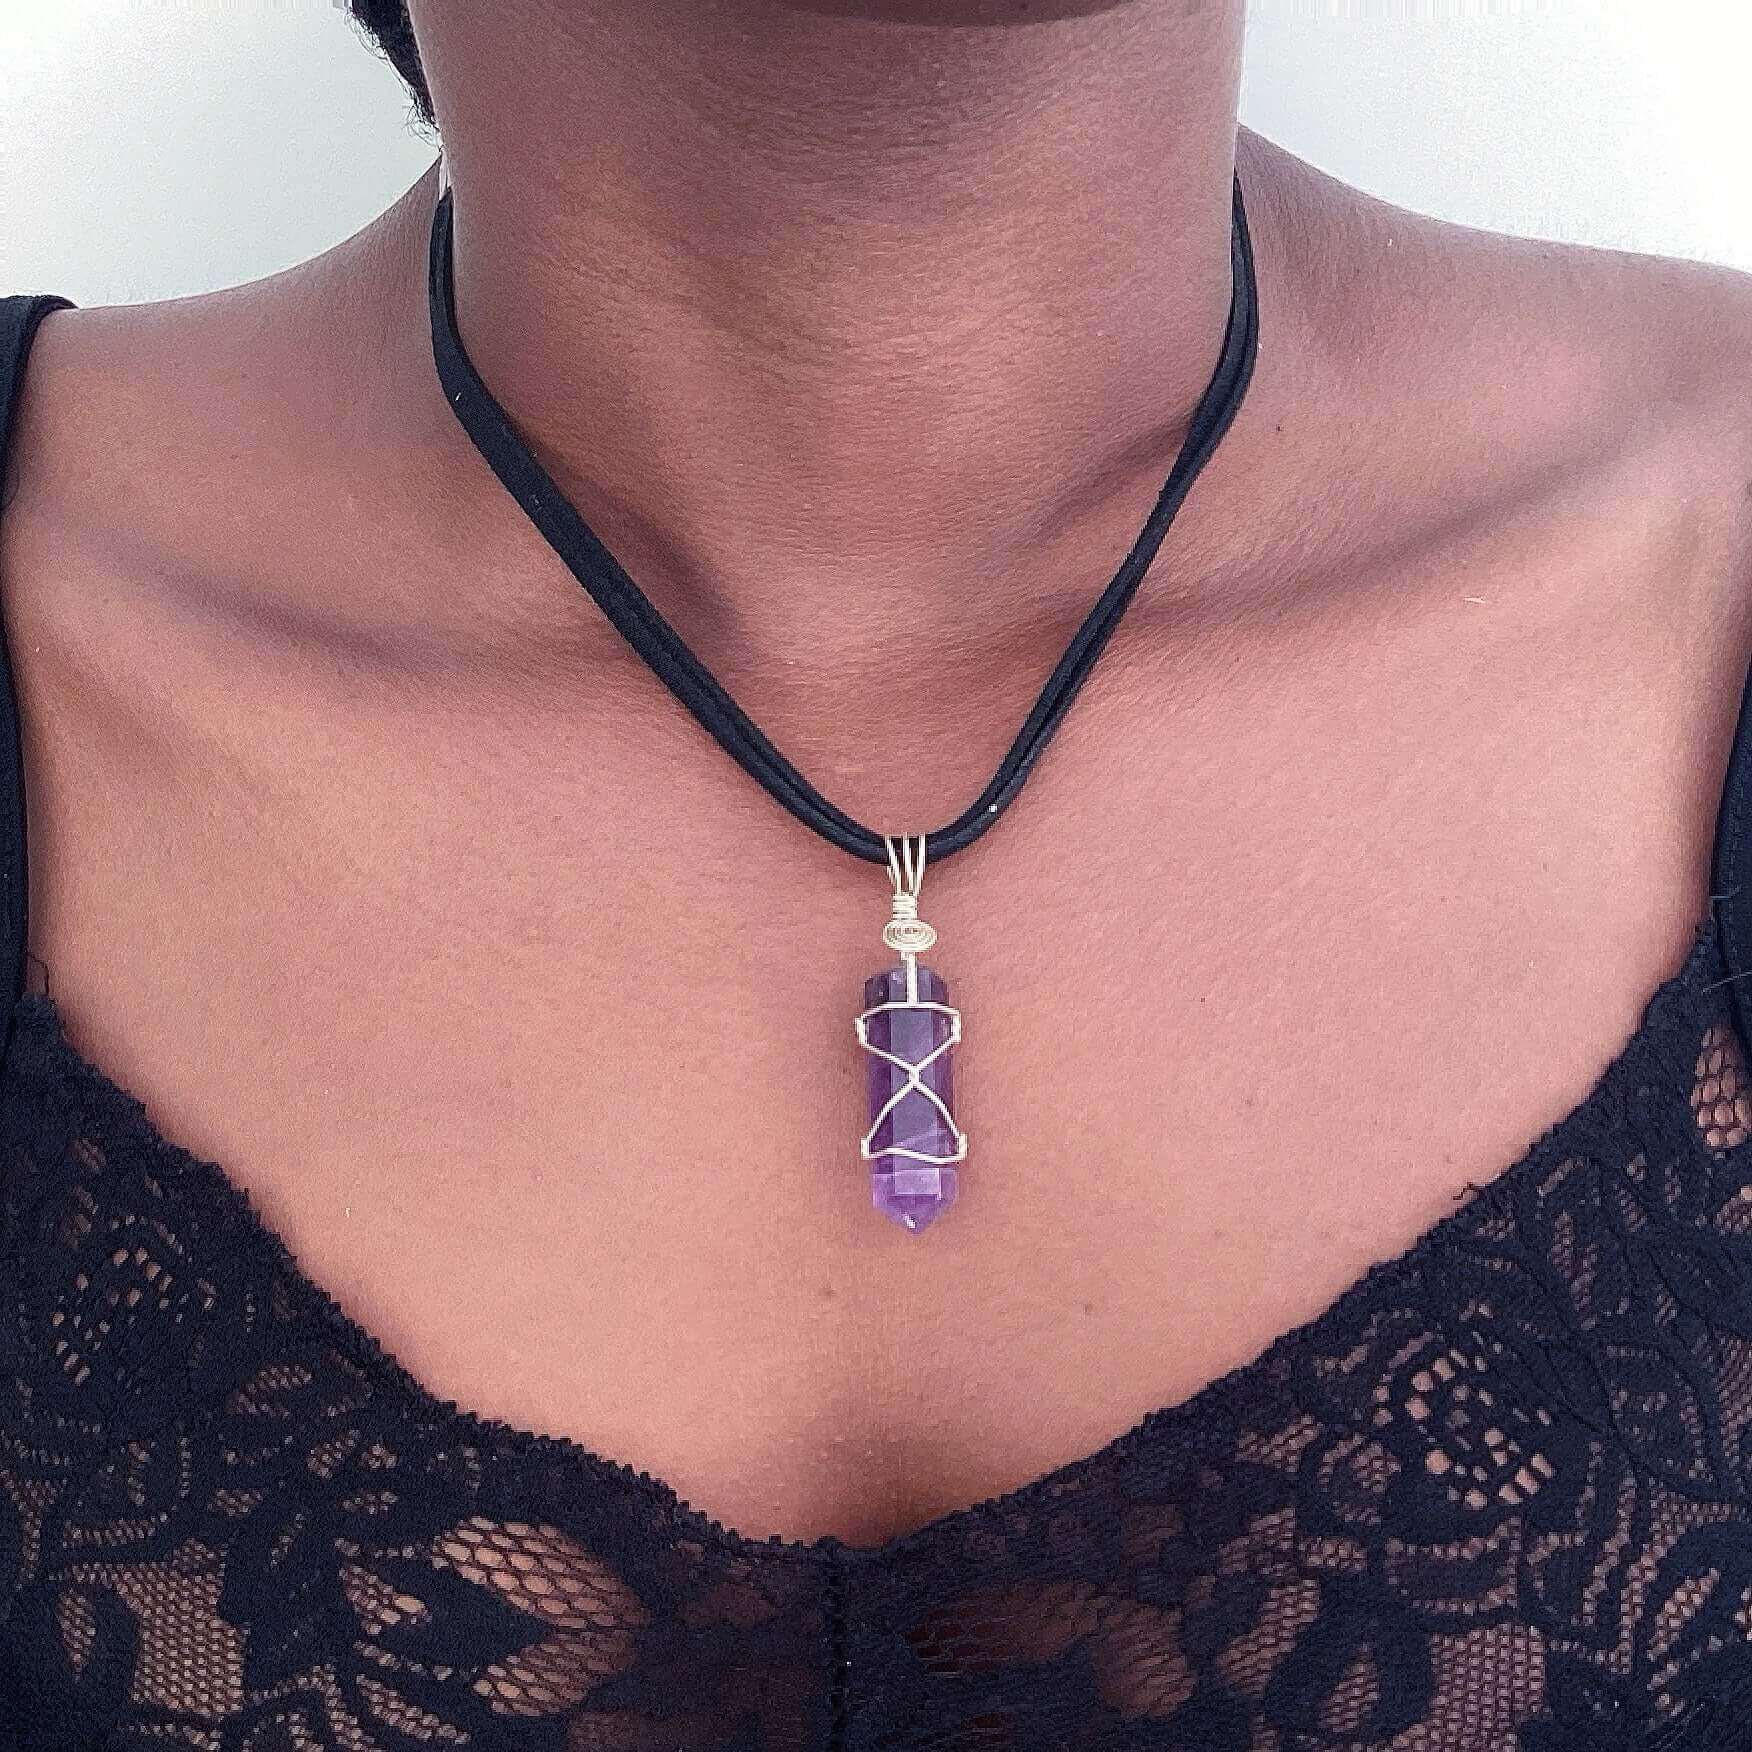 Silver wire bound cut and polished amethyst on choker.